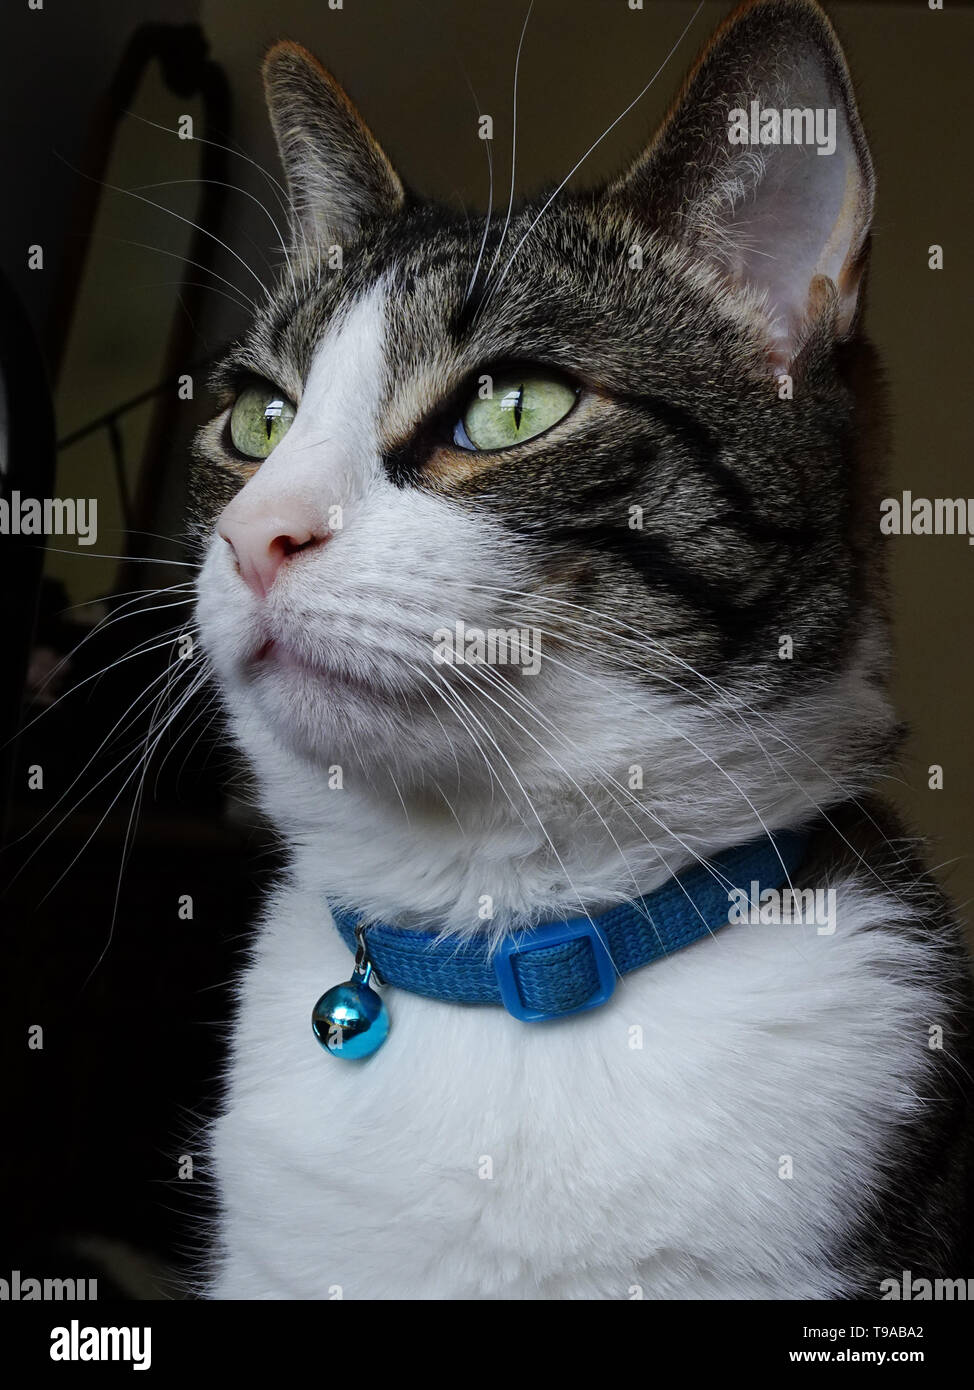 Gray and white tabby cat at attention. Stock Photo